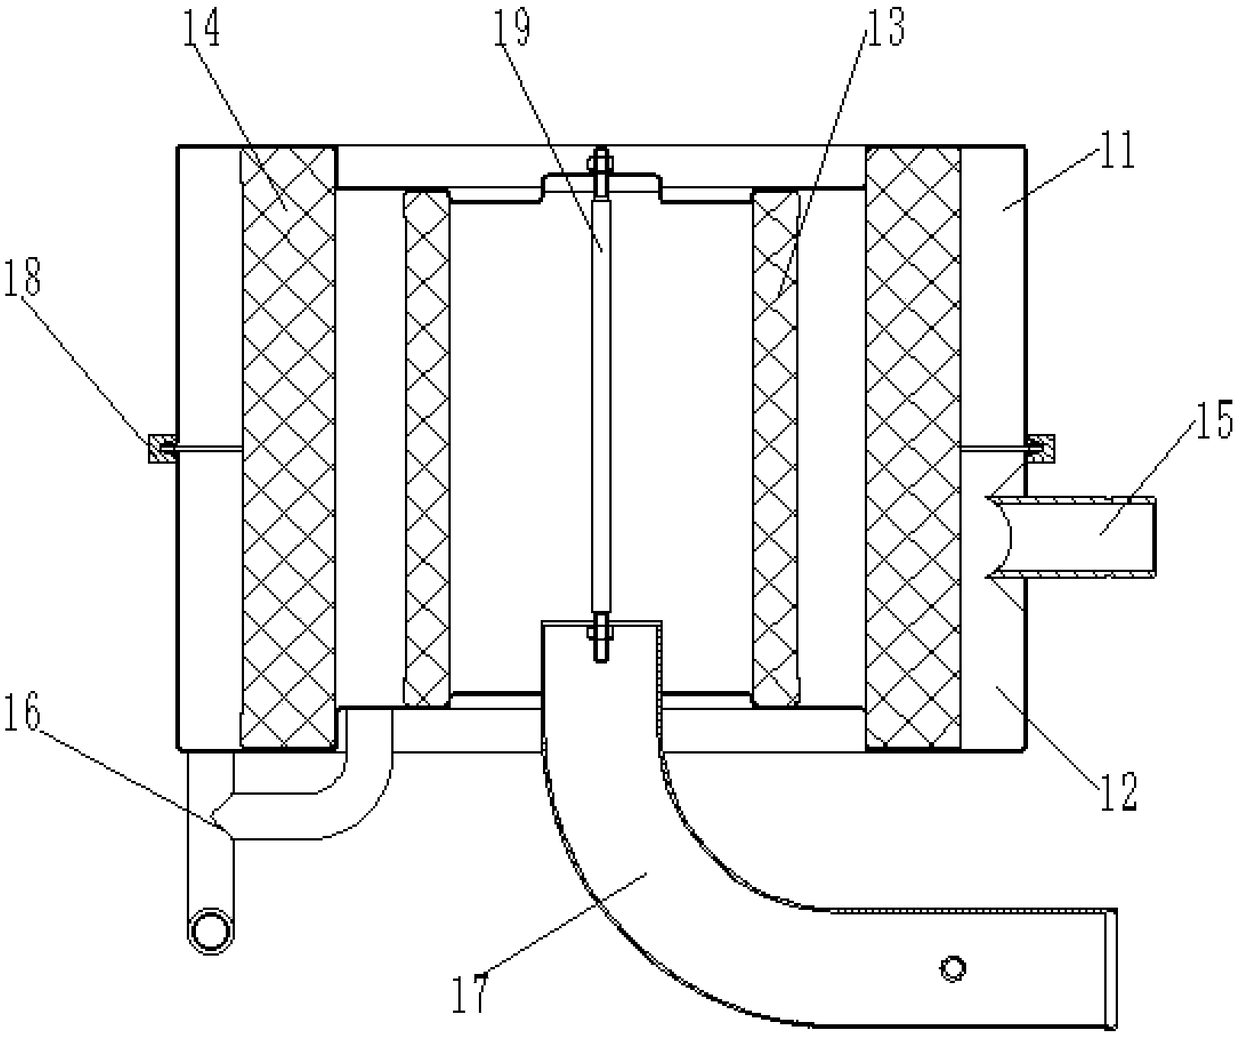 Crankcase ventilation system and gas engine